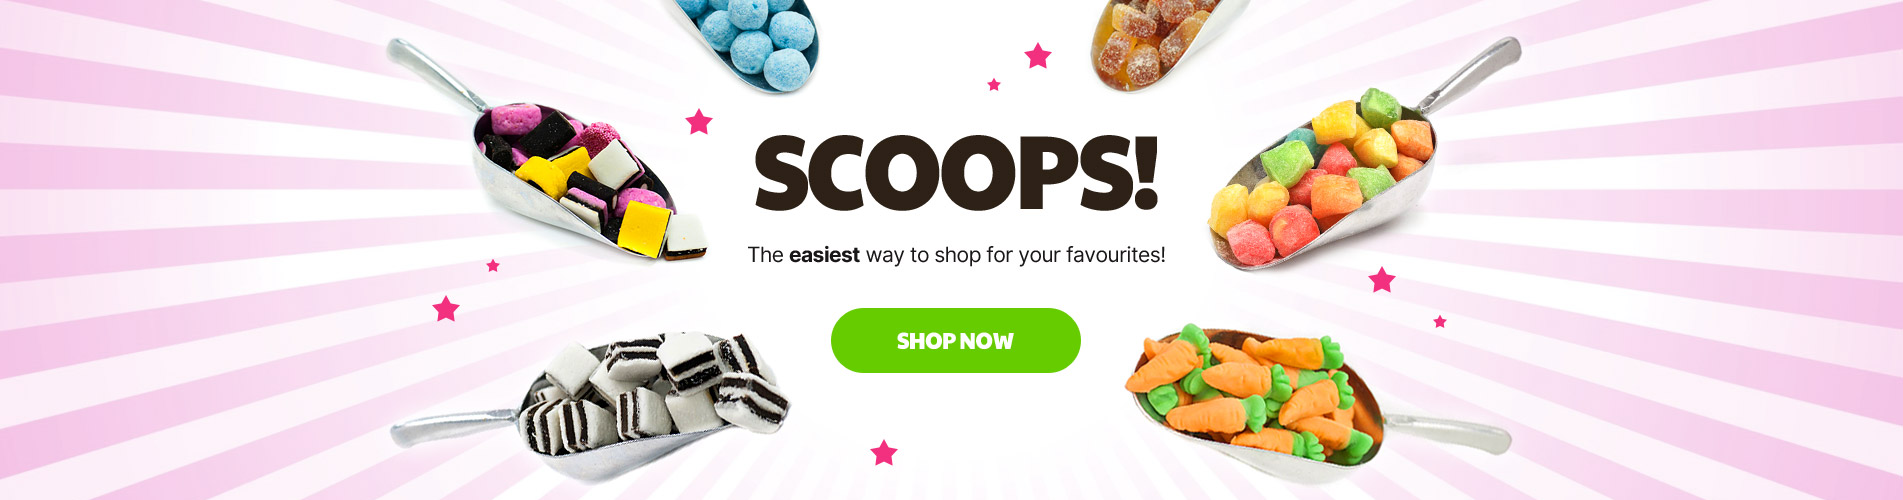 Scoops! - The easiest way to shop for your favourites!